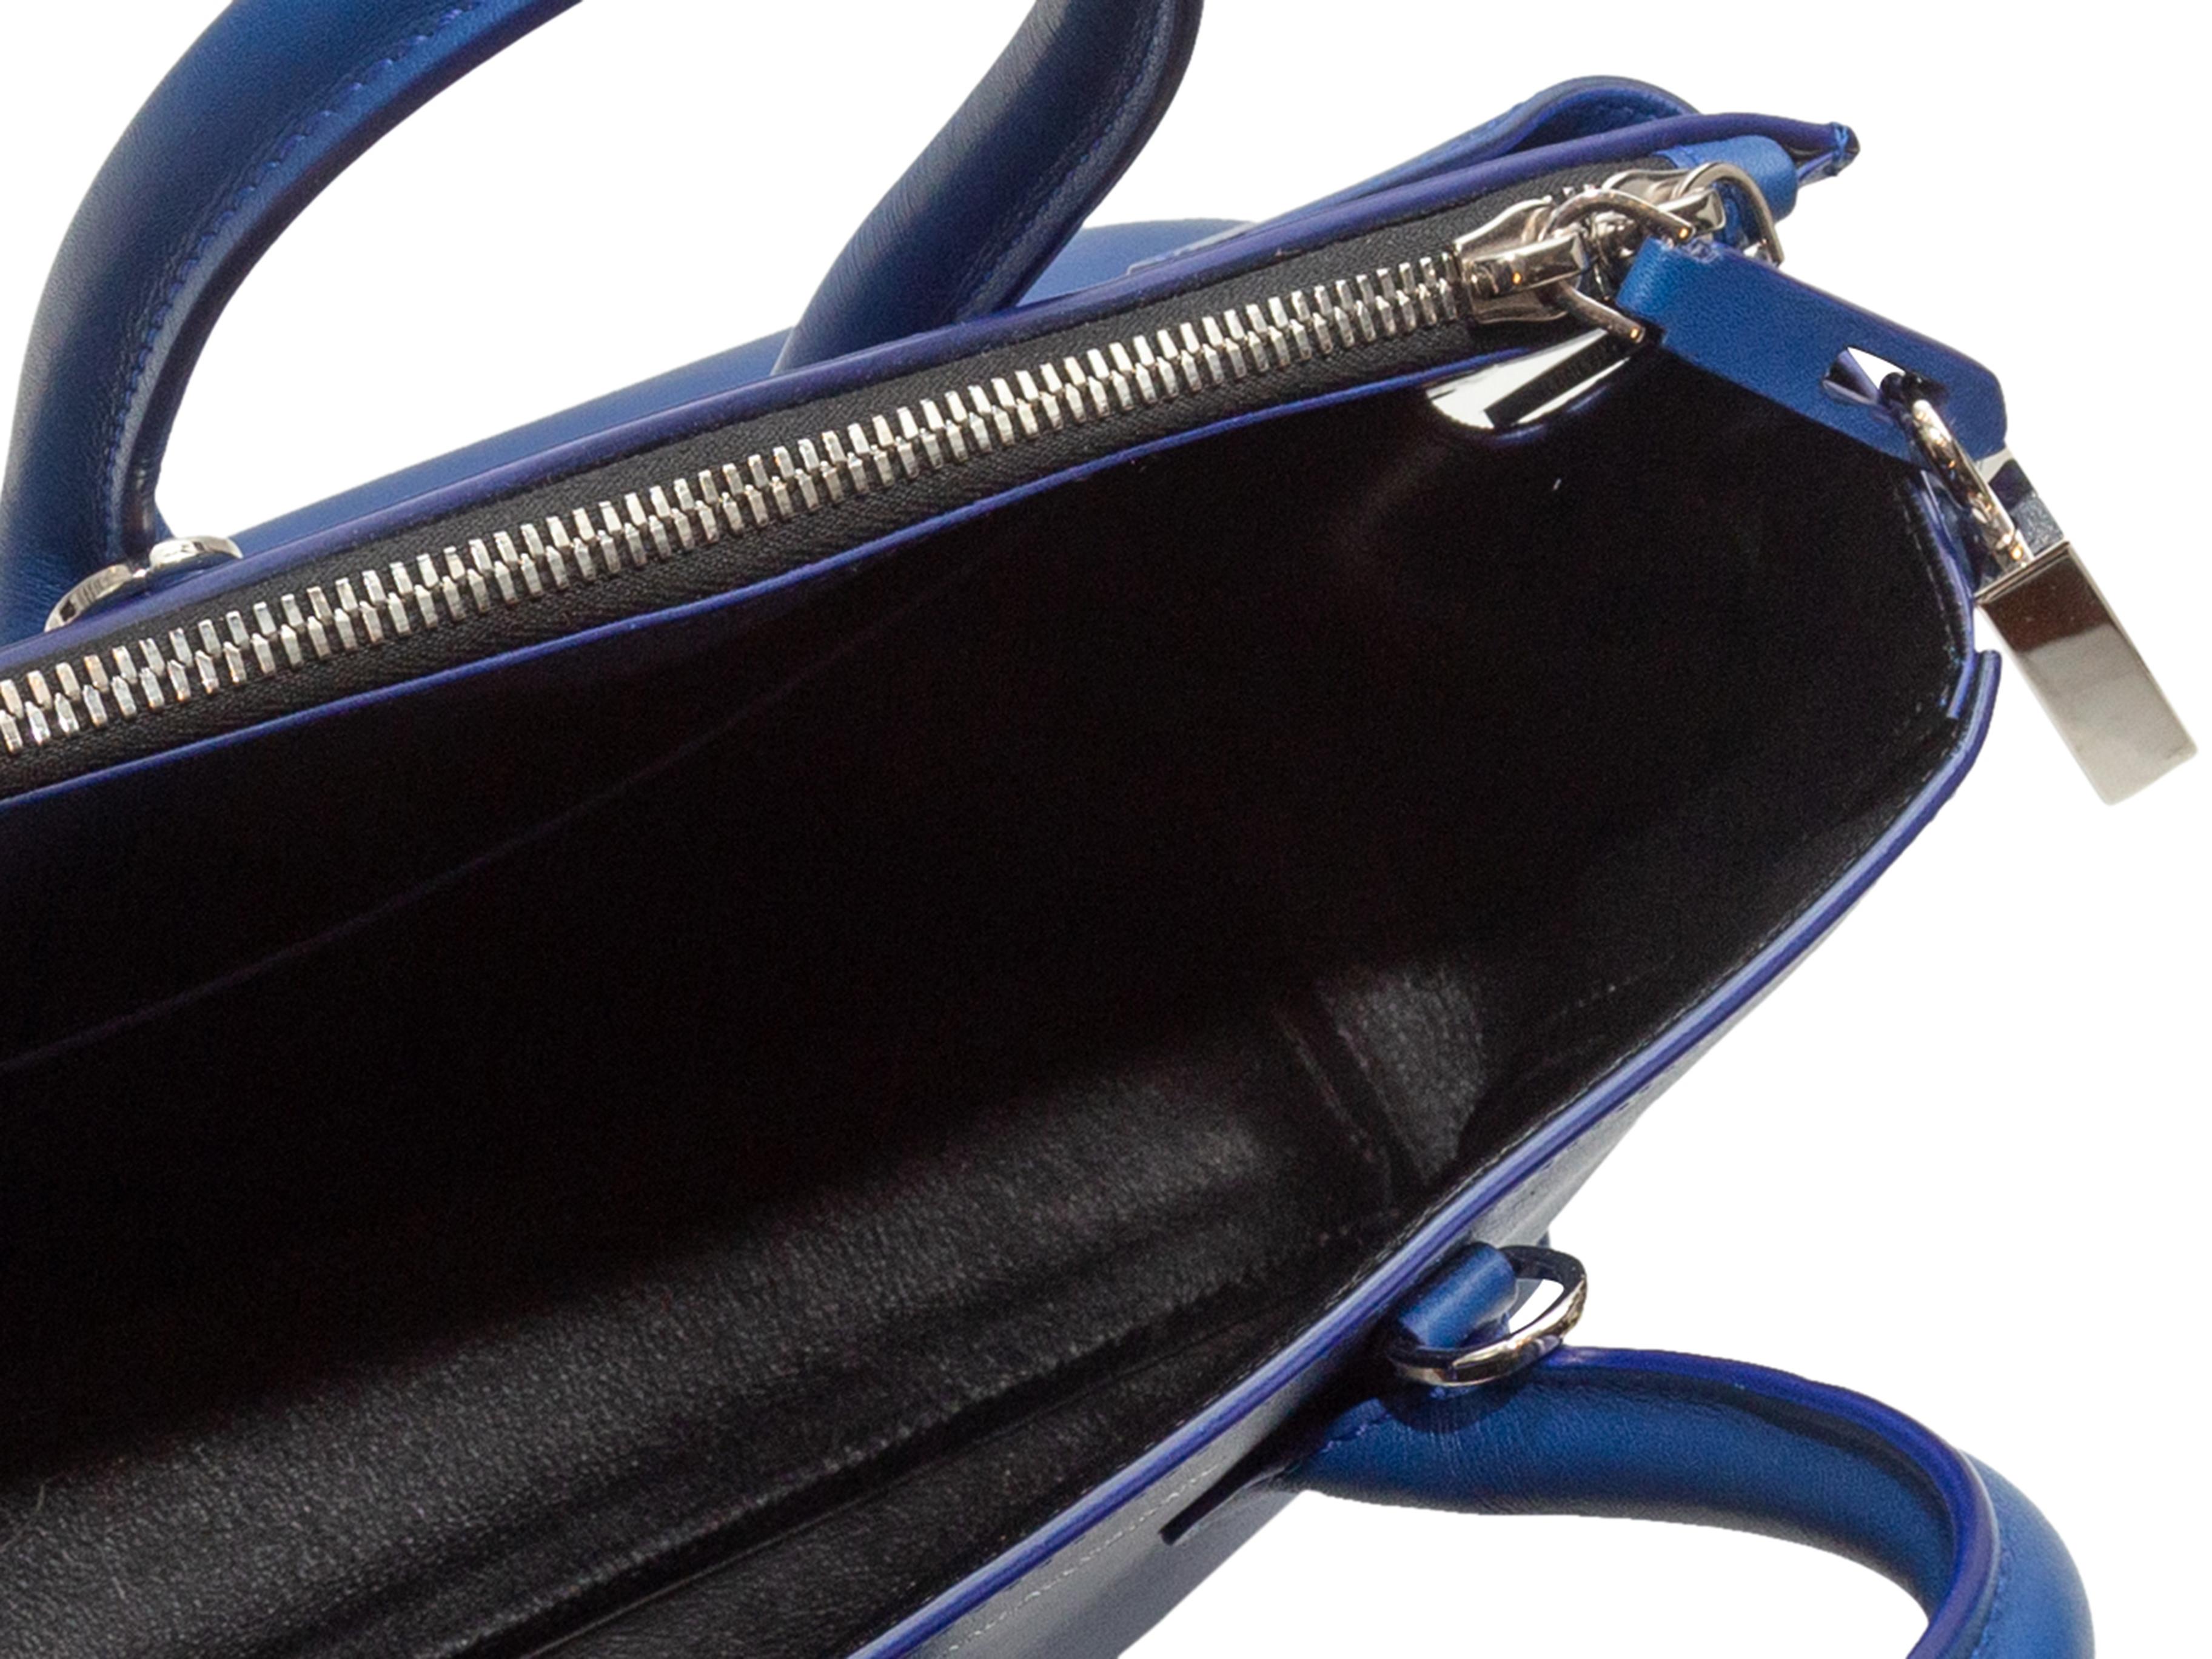 Product Details: Blue Calvin Klein 205W39NYC Leather Handbag. This bag features a leather body, silver-tone hardware, dual rolled top handles, optional flat shoulder strap, and a zip closure at the top. 10